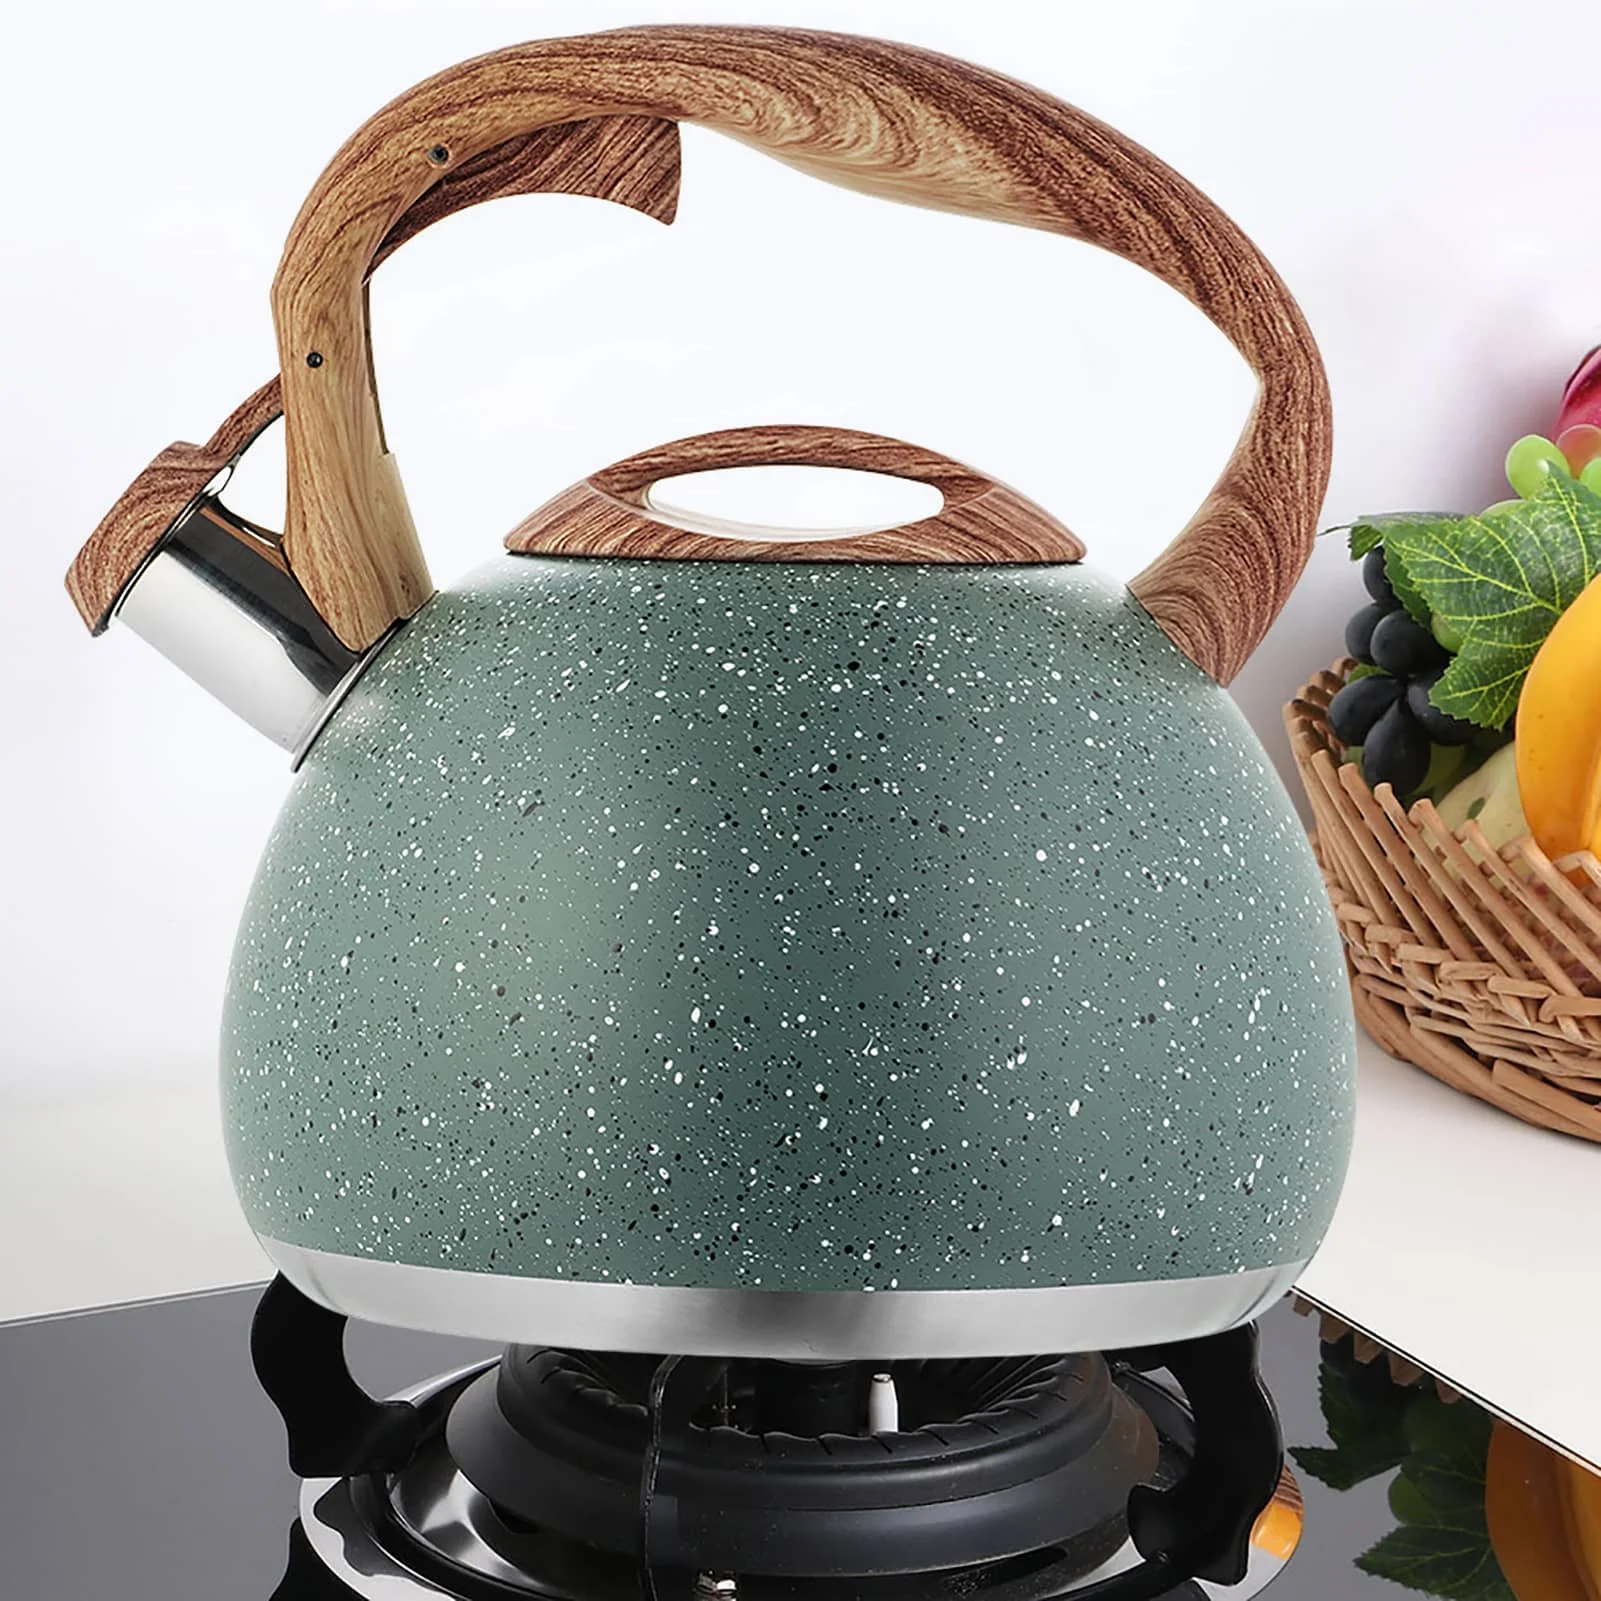 

Stainless Steel Whistling Tea Kettles Stove Top Enamel Food Grade Tea Pot With Heat-proof Handle For Gas Induction Cookers Use